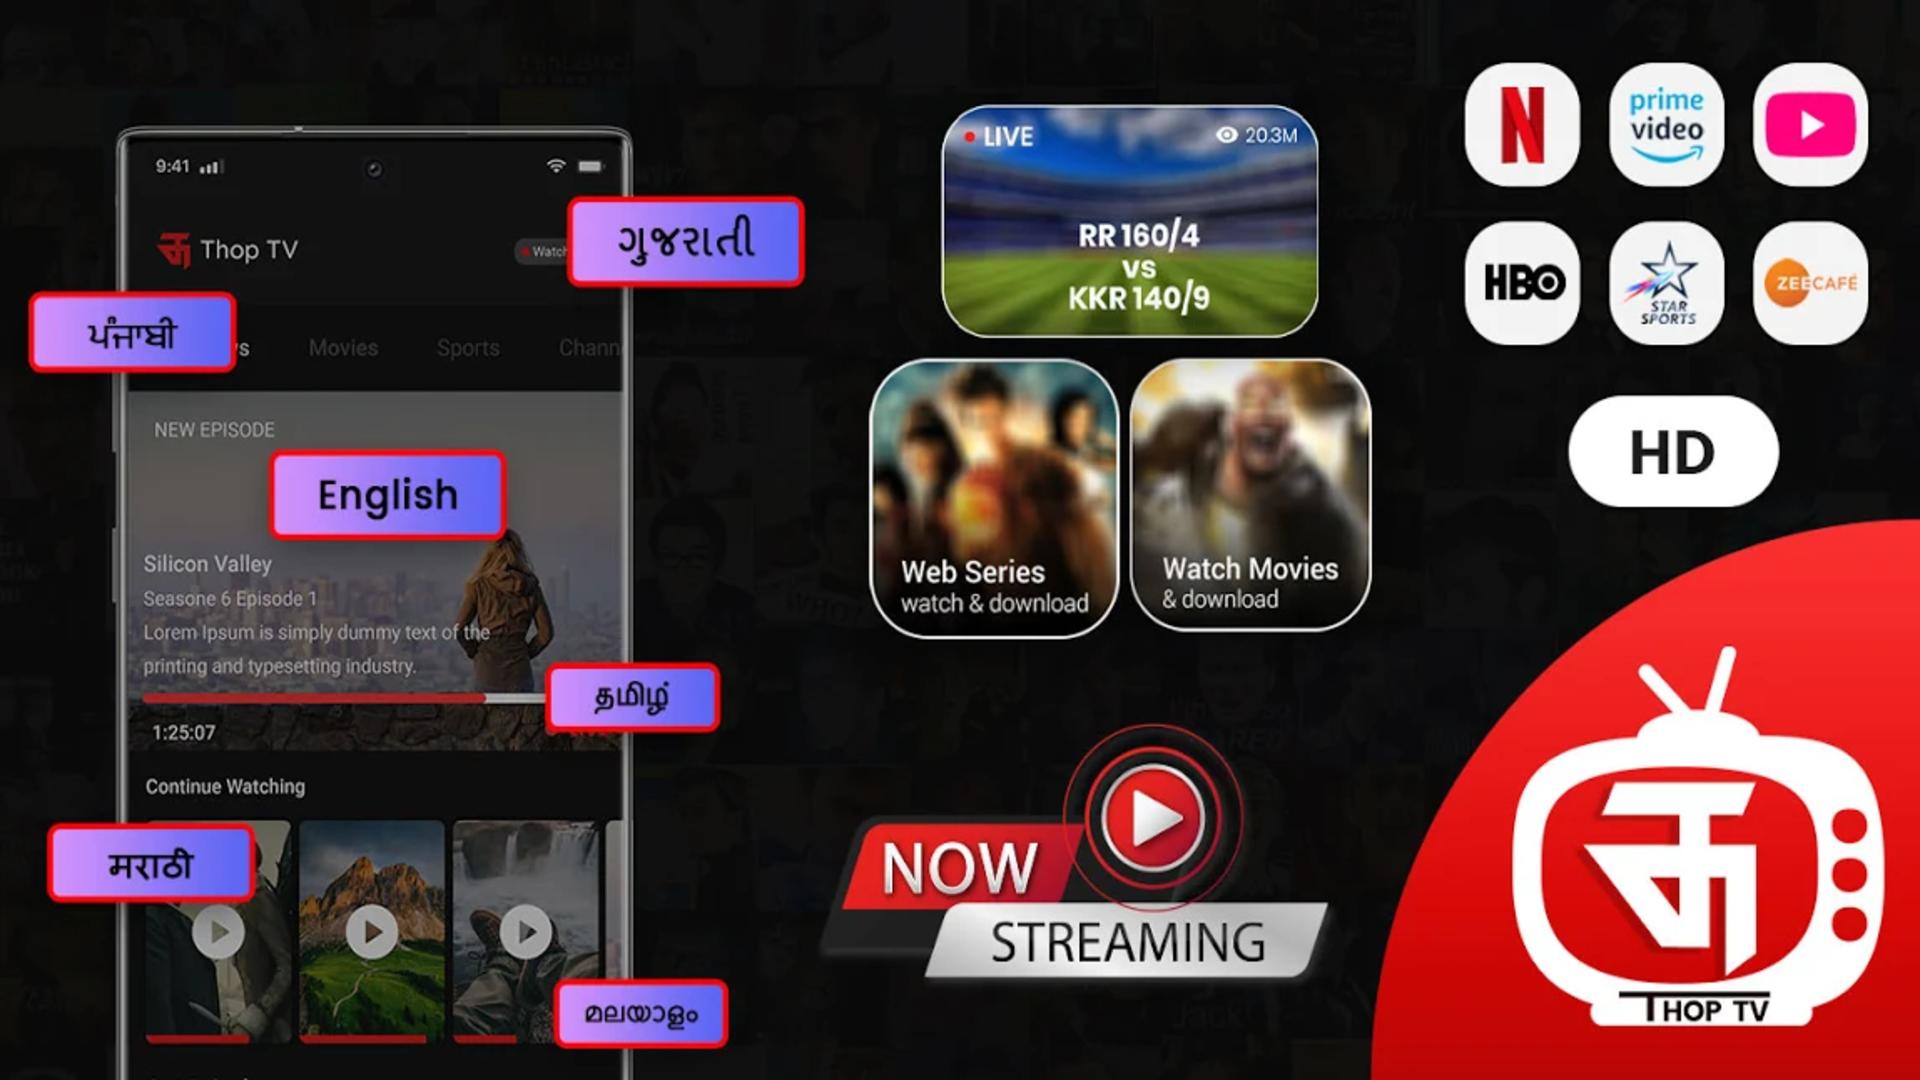 Thop TV for Android - APK Download